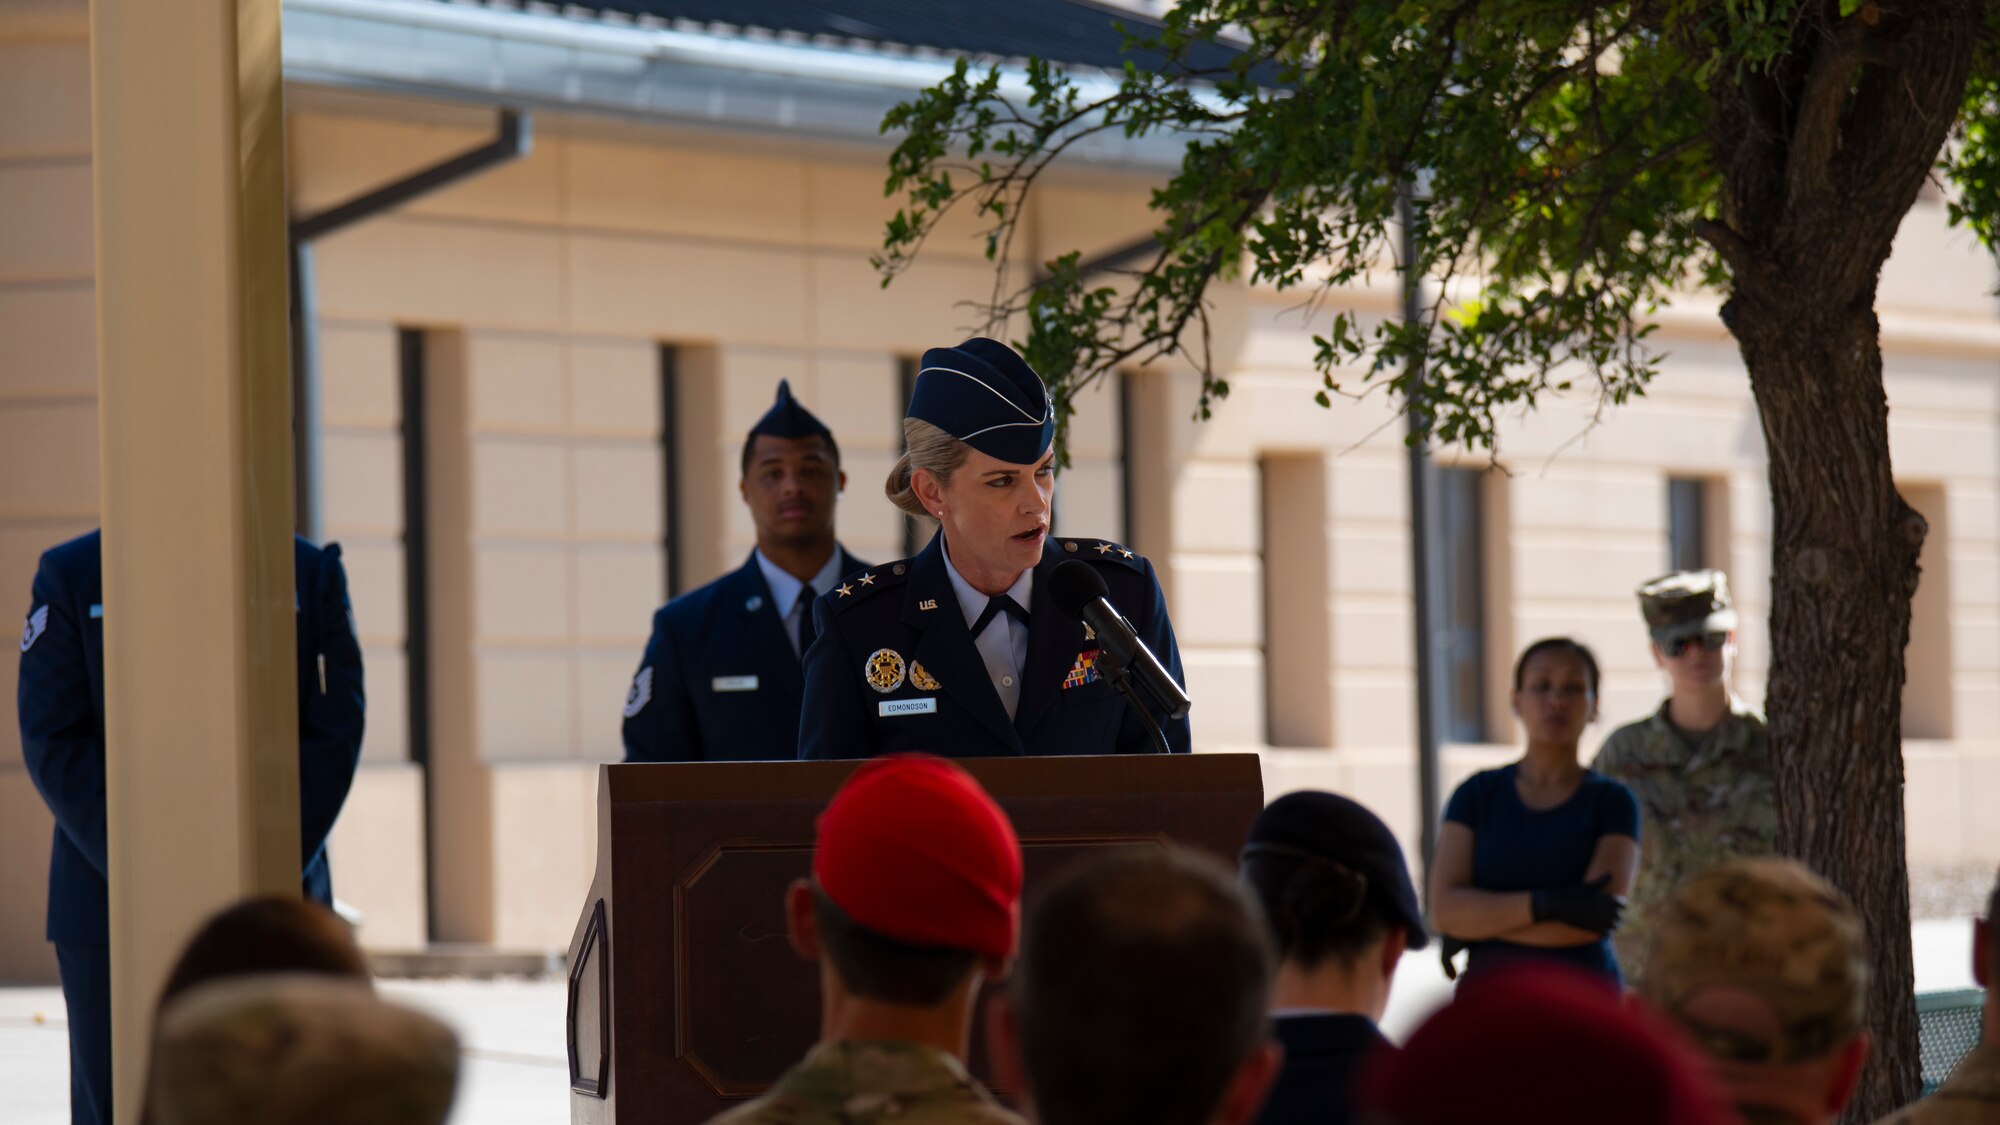 U.S. Air Force Maj. Gen. Michele Edmondson, 2nd Air Force commander and presiding officer, addresses members of the Special Warfare Training Wing during the SWTW change of command ceremony at Joint Base San Antonio-Chapman Training Annex, Texas, July 11, 2022. Col. Nathan Colunga received command of the SWTW from the outgoing commander, Col. Mason Dula.